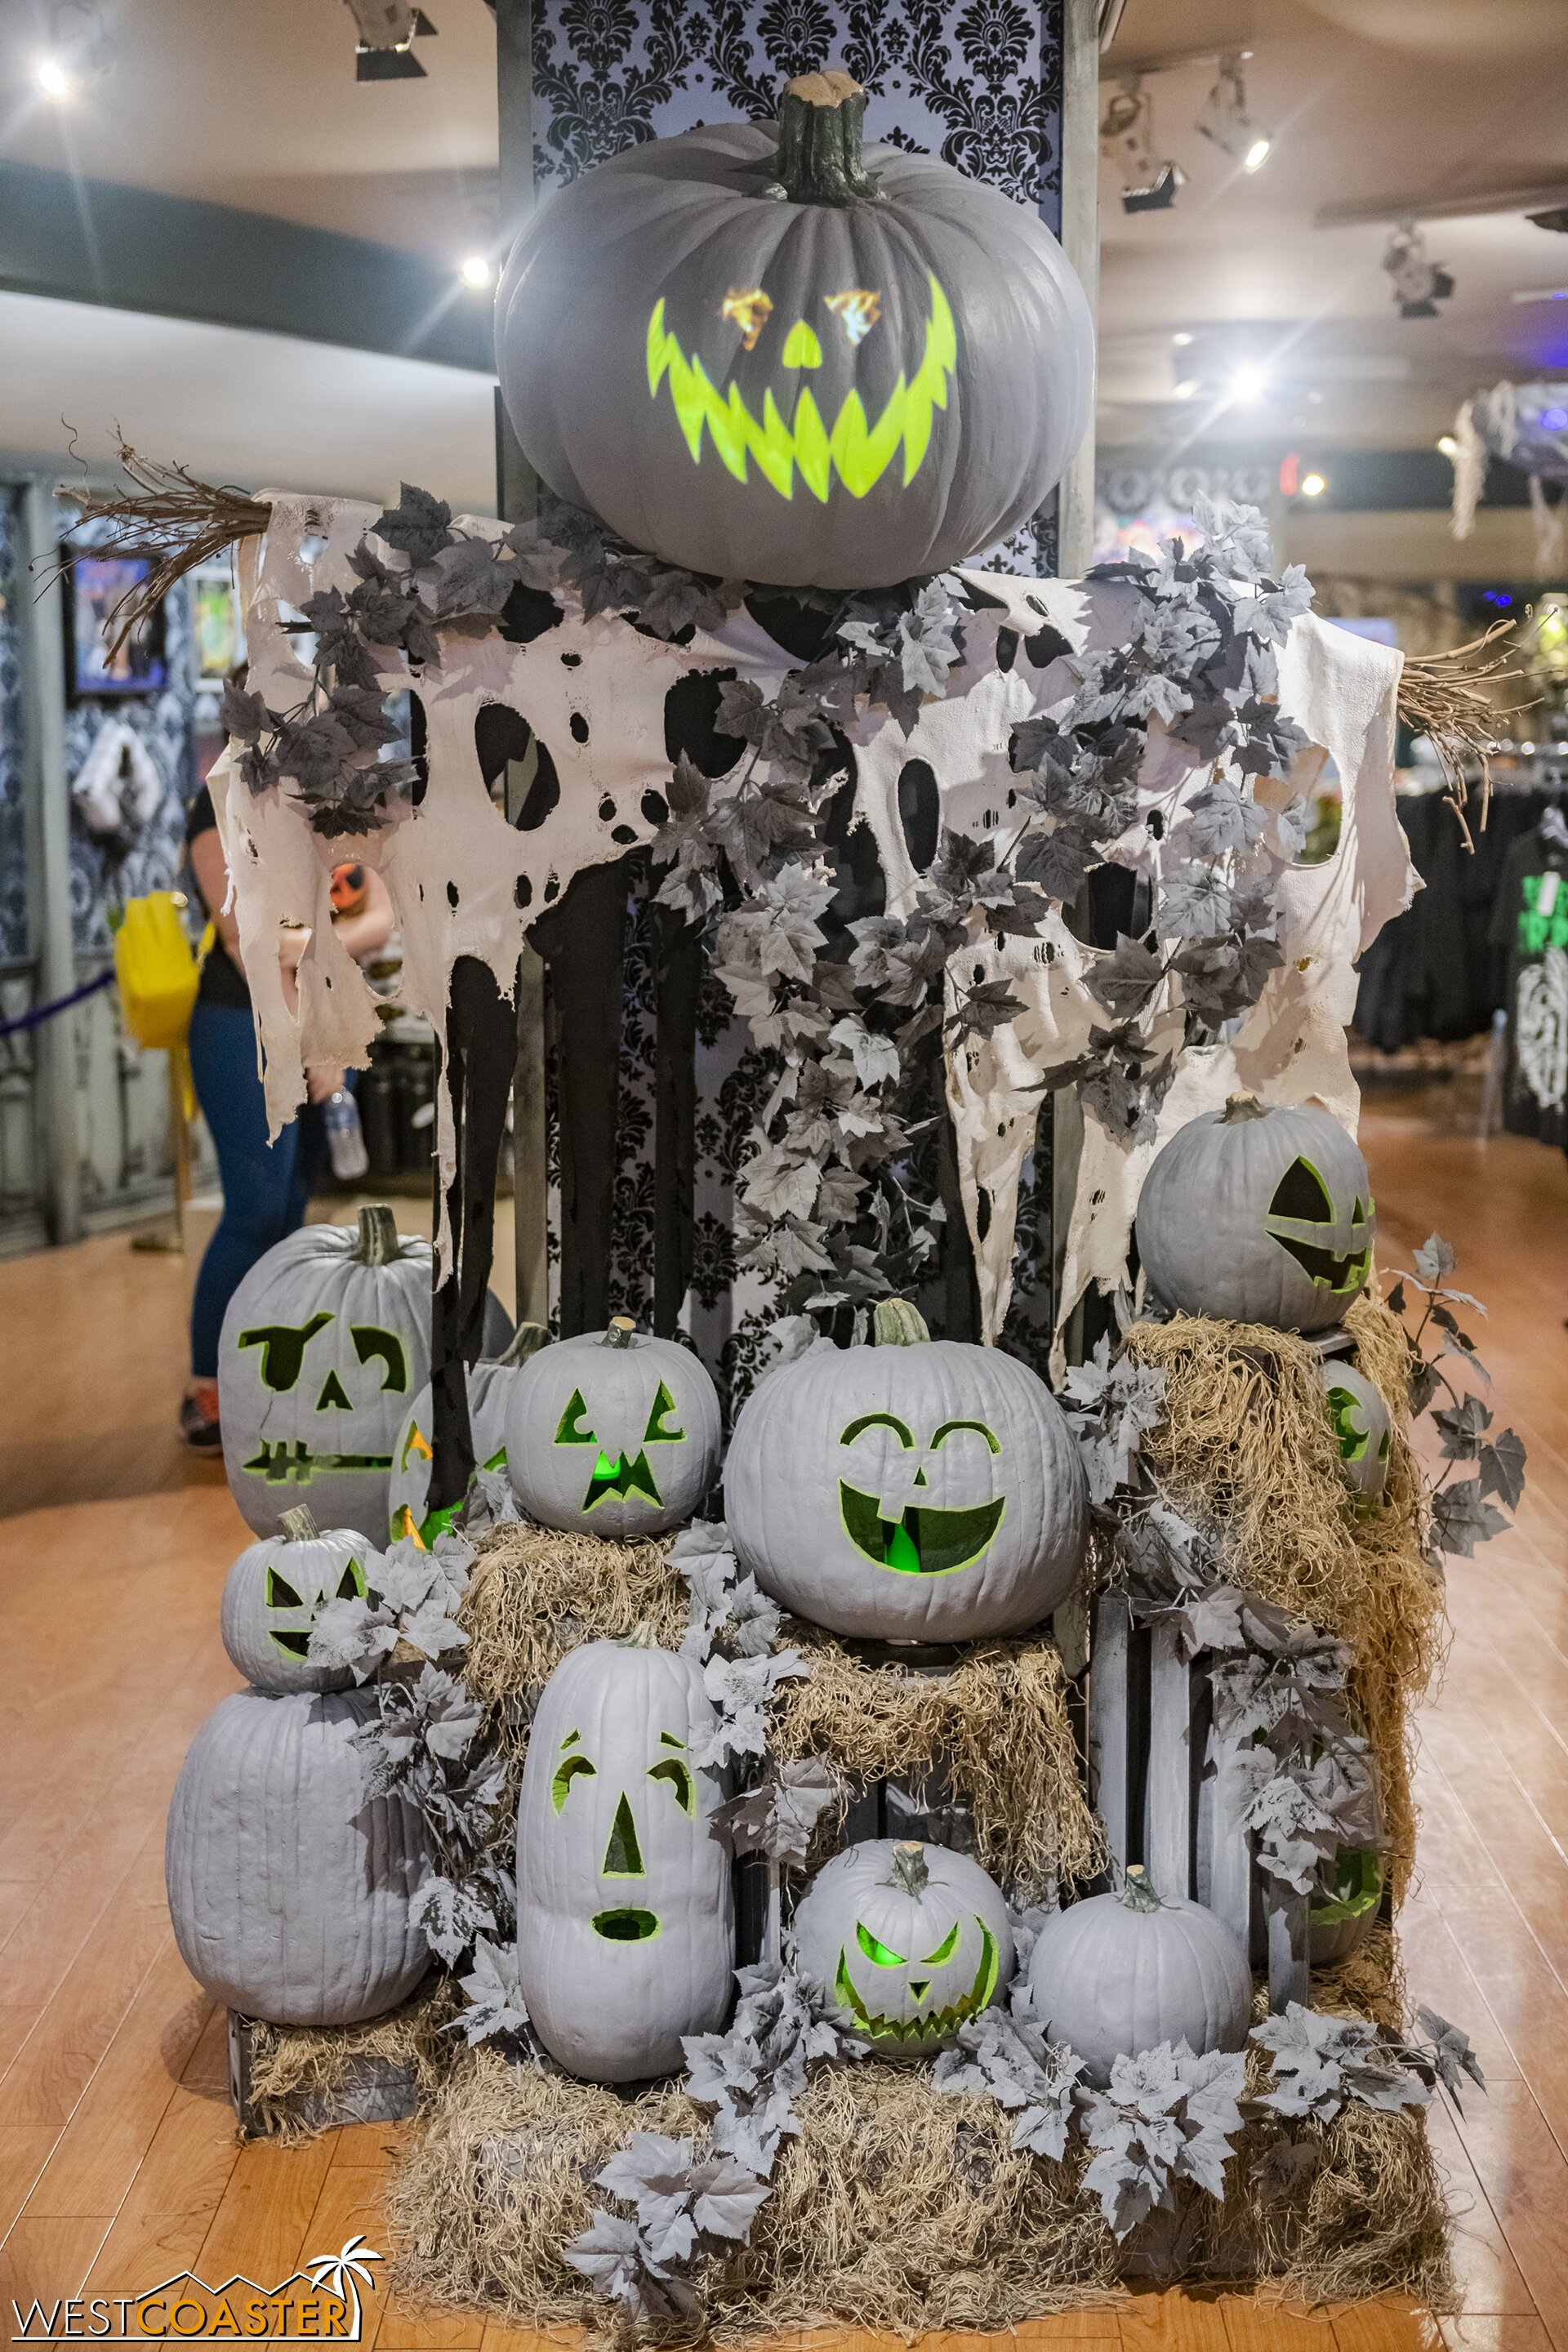  This gray and green jack-o-lantern display looks pretty neat. 